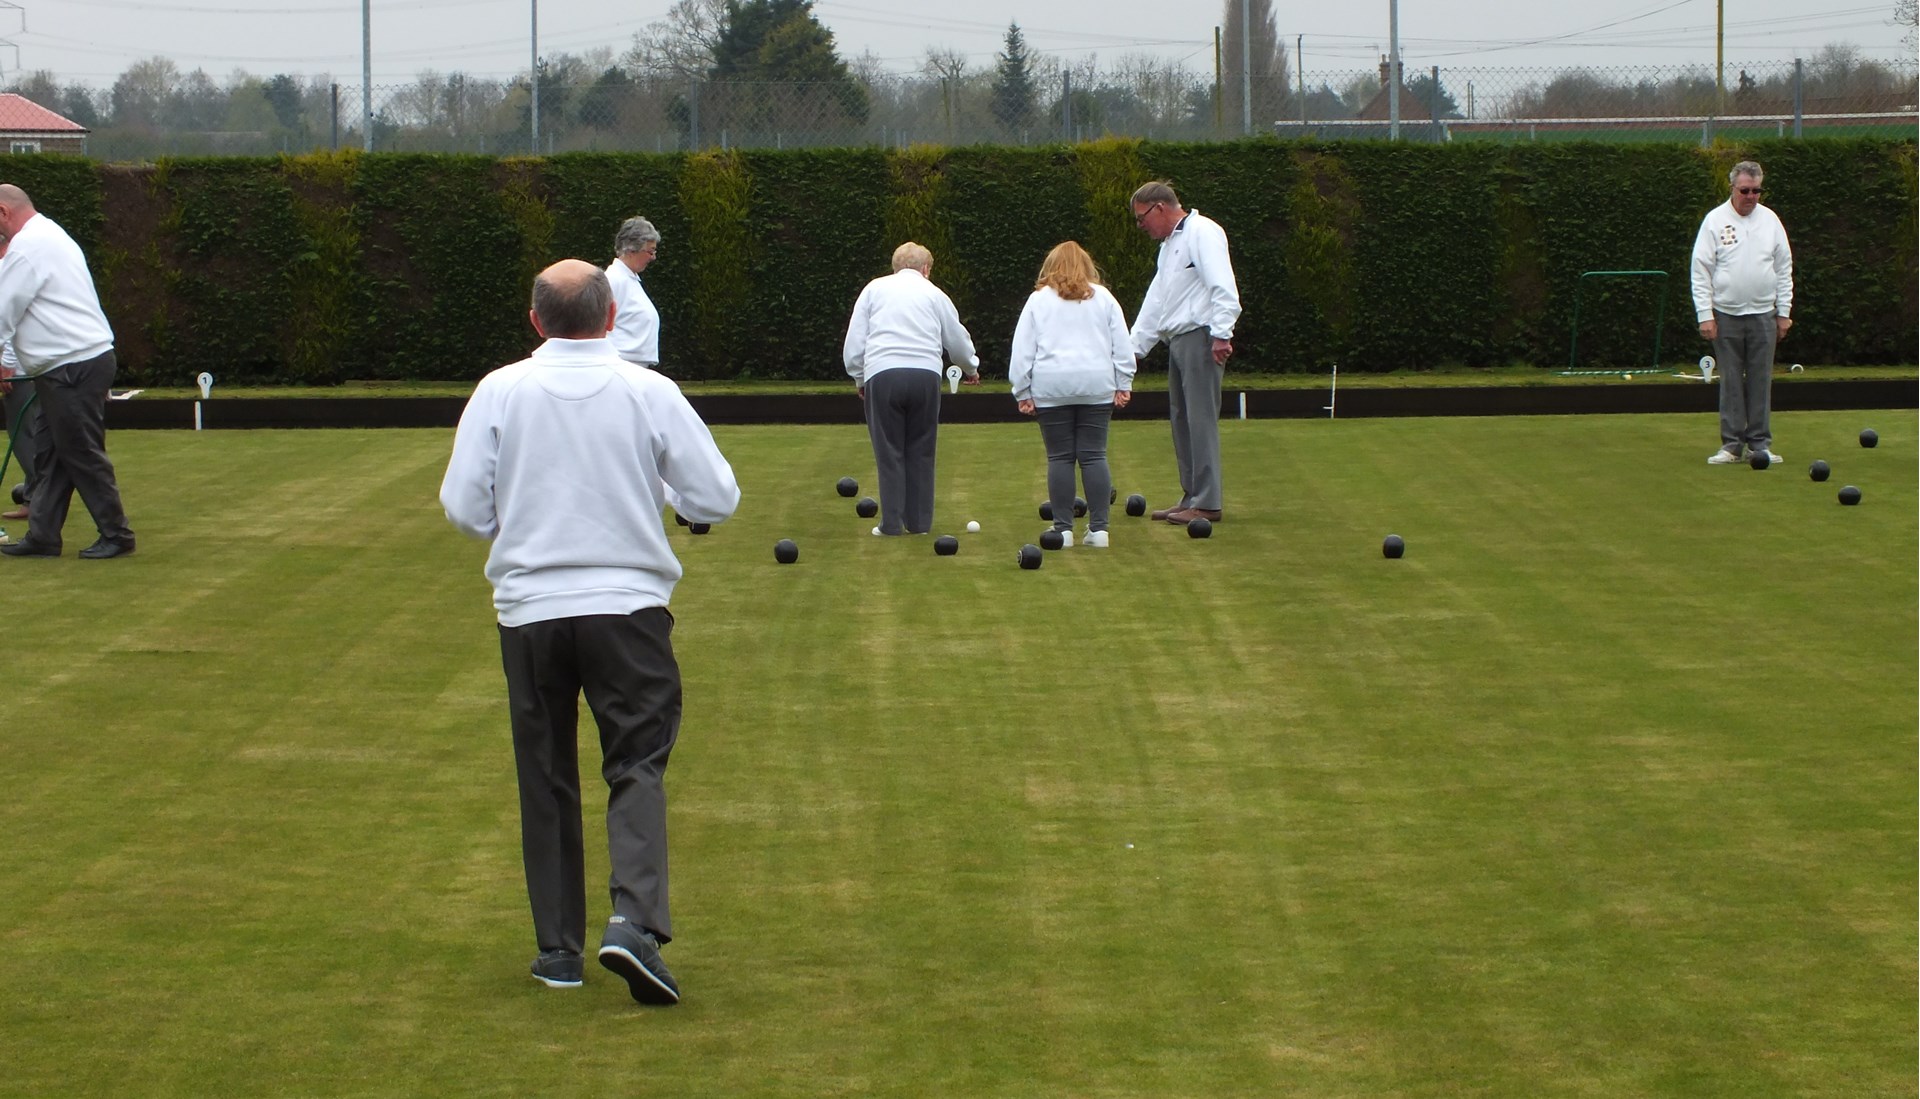 Collingham Bowls Club Opening of the Green 2018